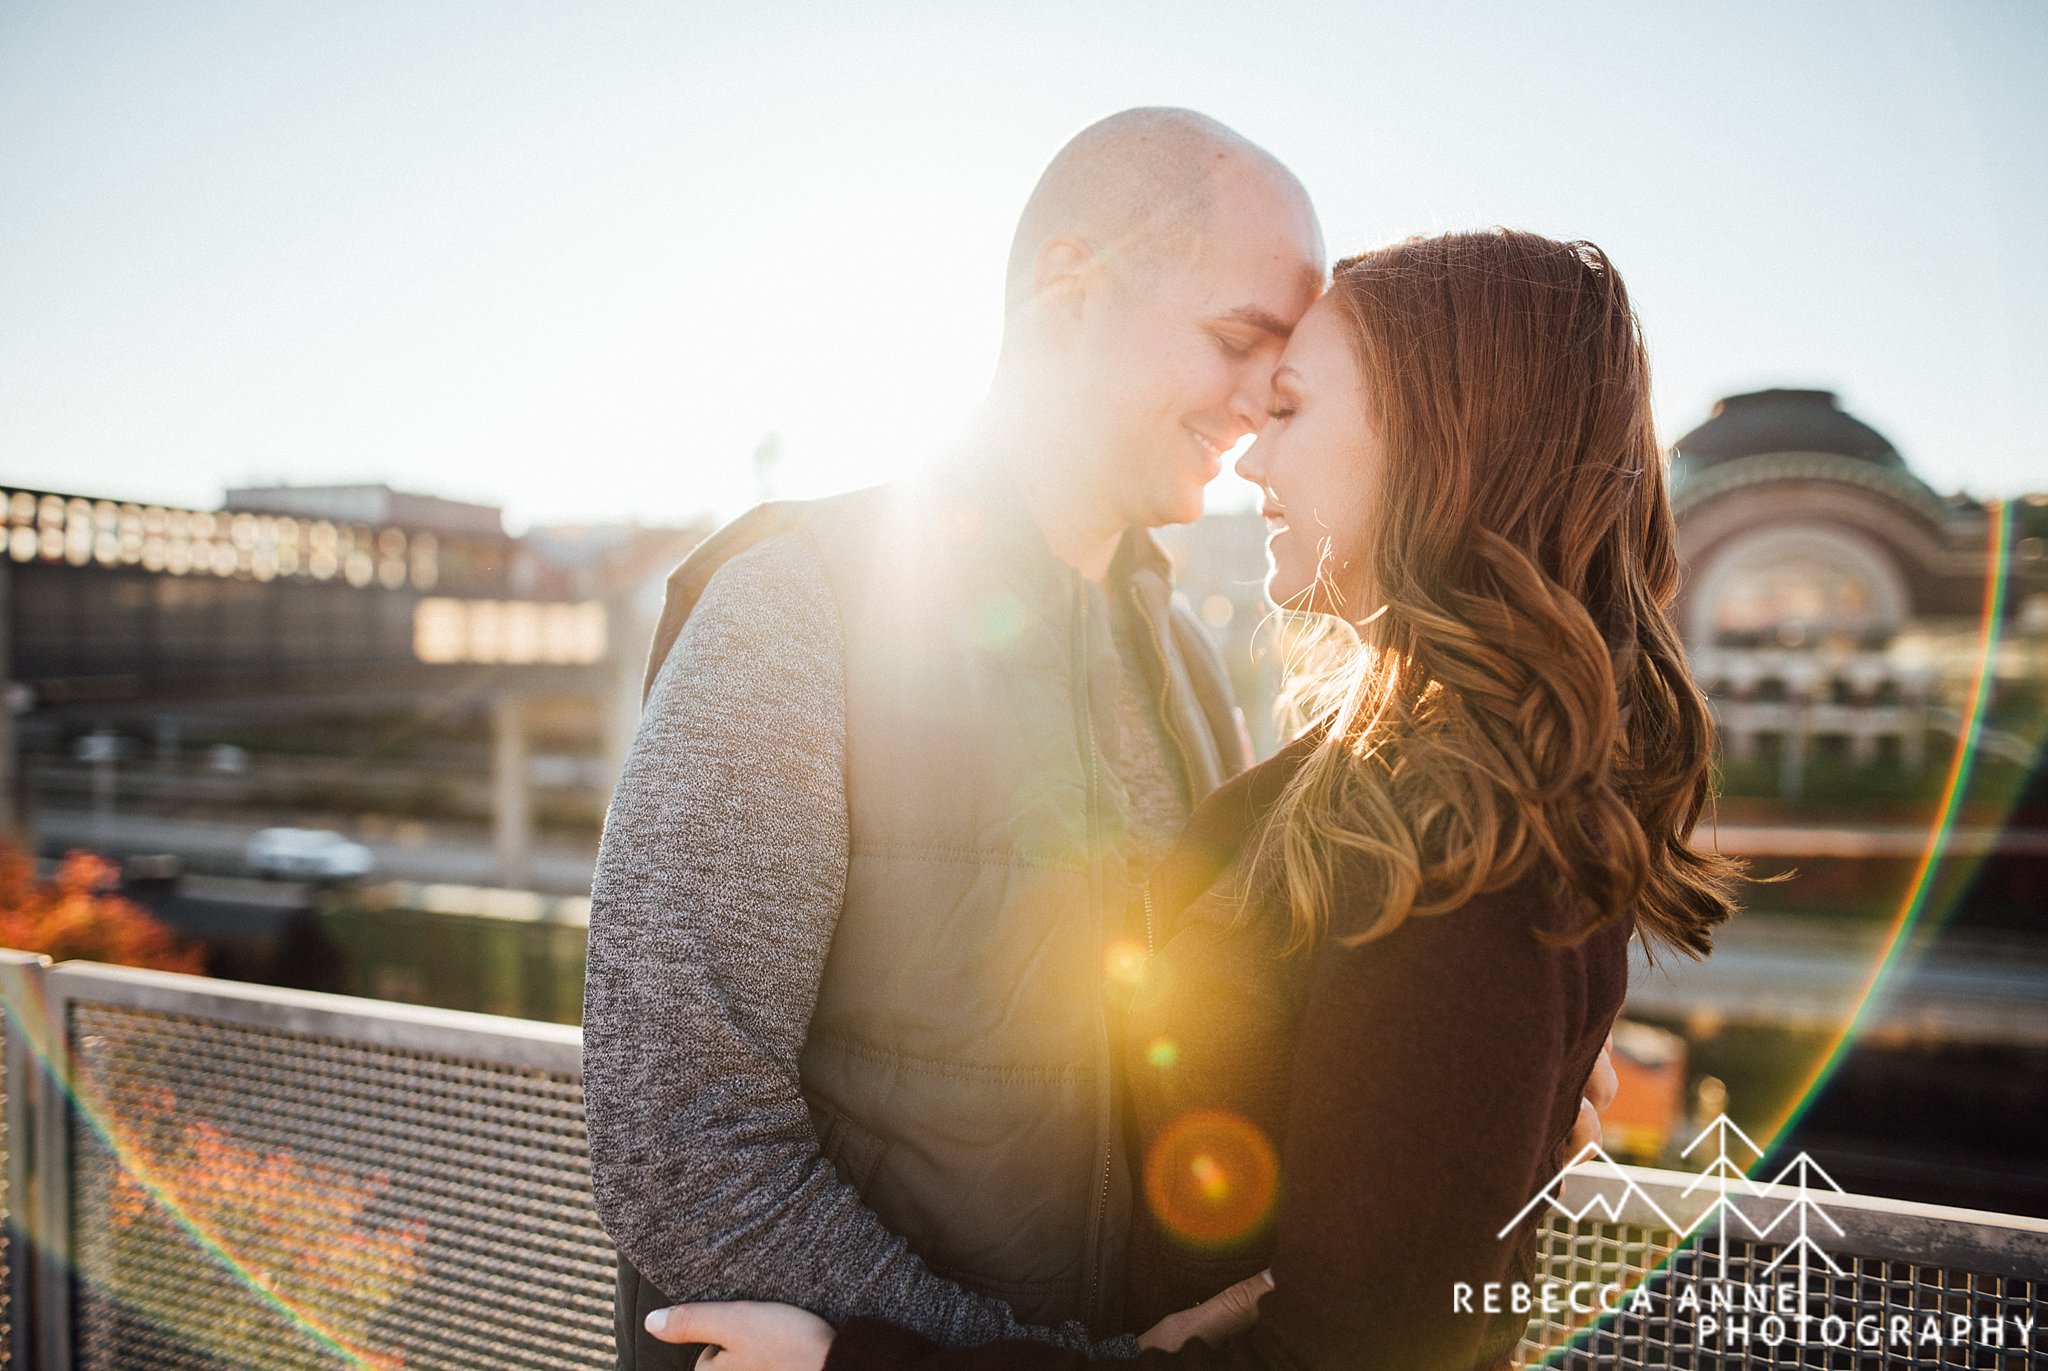 Downtown Tacoma Engagement,Seattle engagement photographer,Seattle engagement Photography,washington engagement photographer,pacific northwest engagement photographer,tacoma engagement photographer,tacoma engagement photography,washington engagement photography,pacific northwest engagement photography,